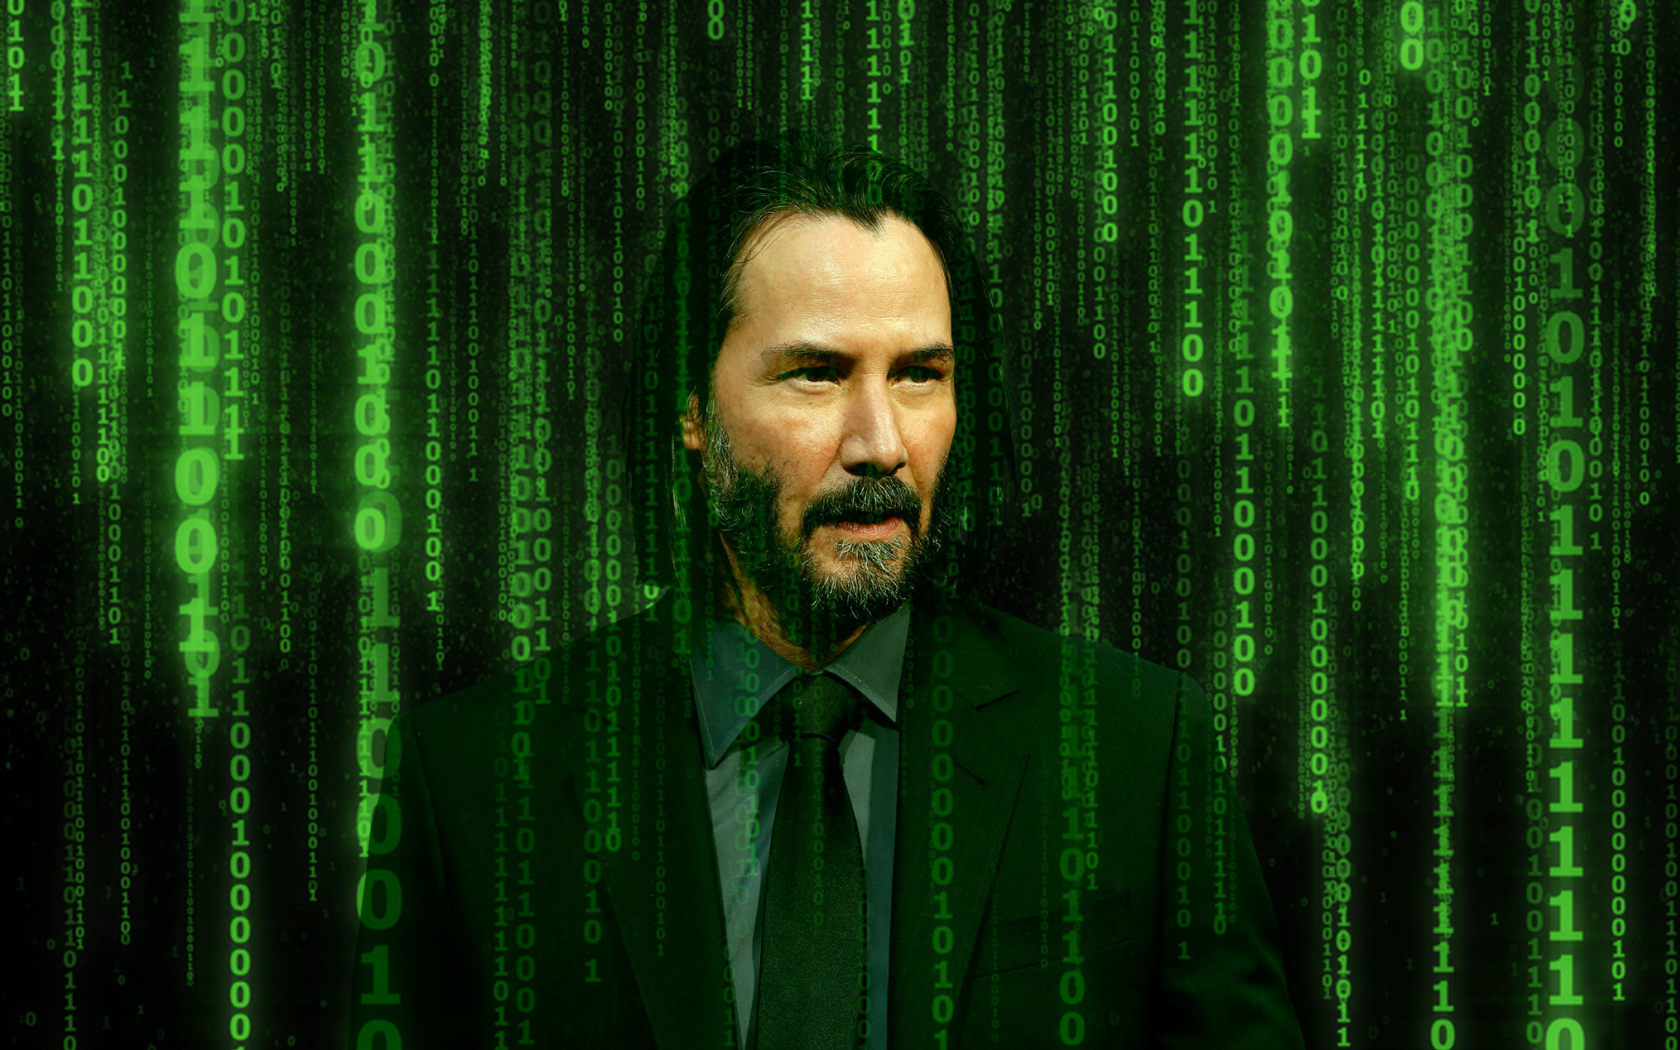 Keanu Reeves in the new Matrix 4 movie, 2021